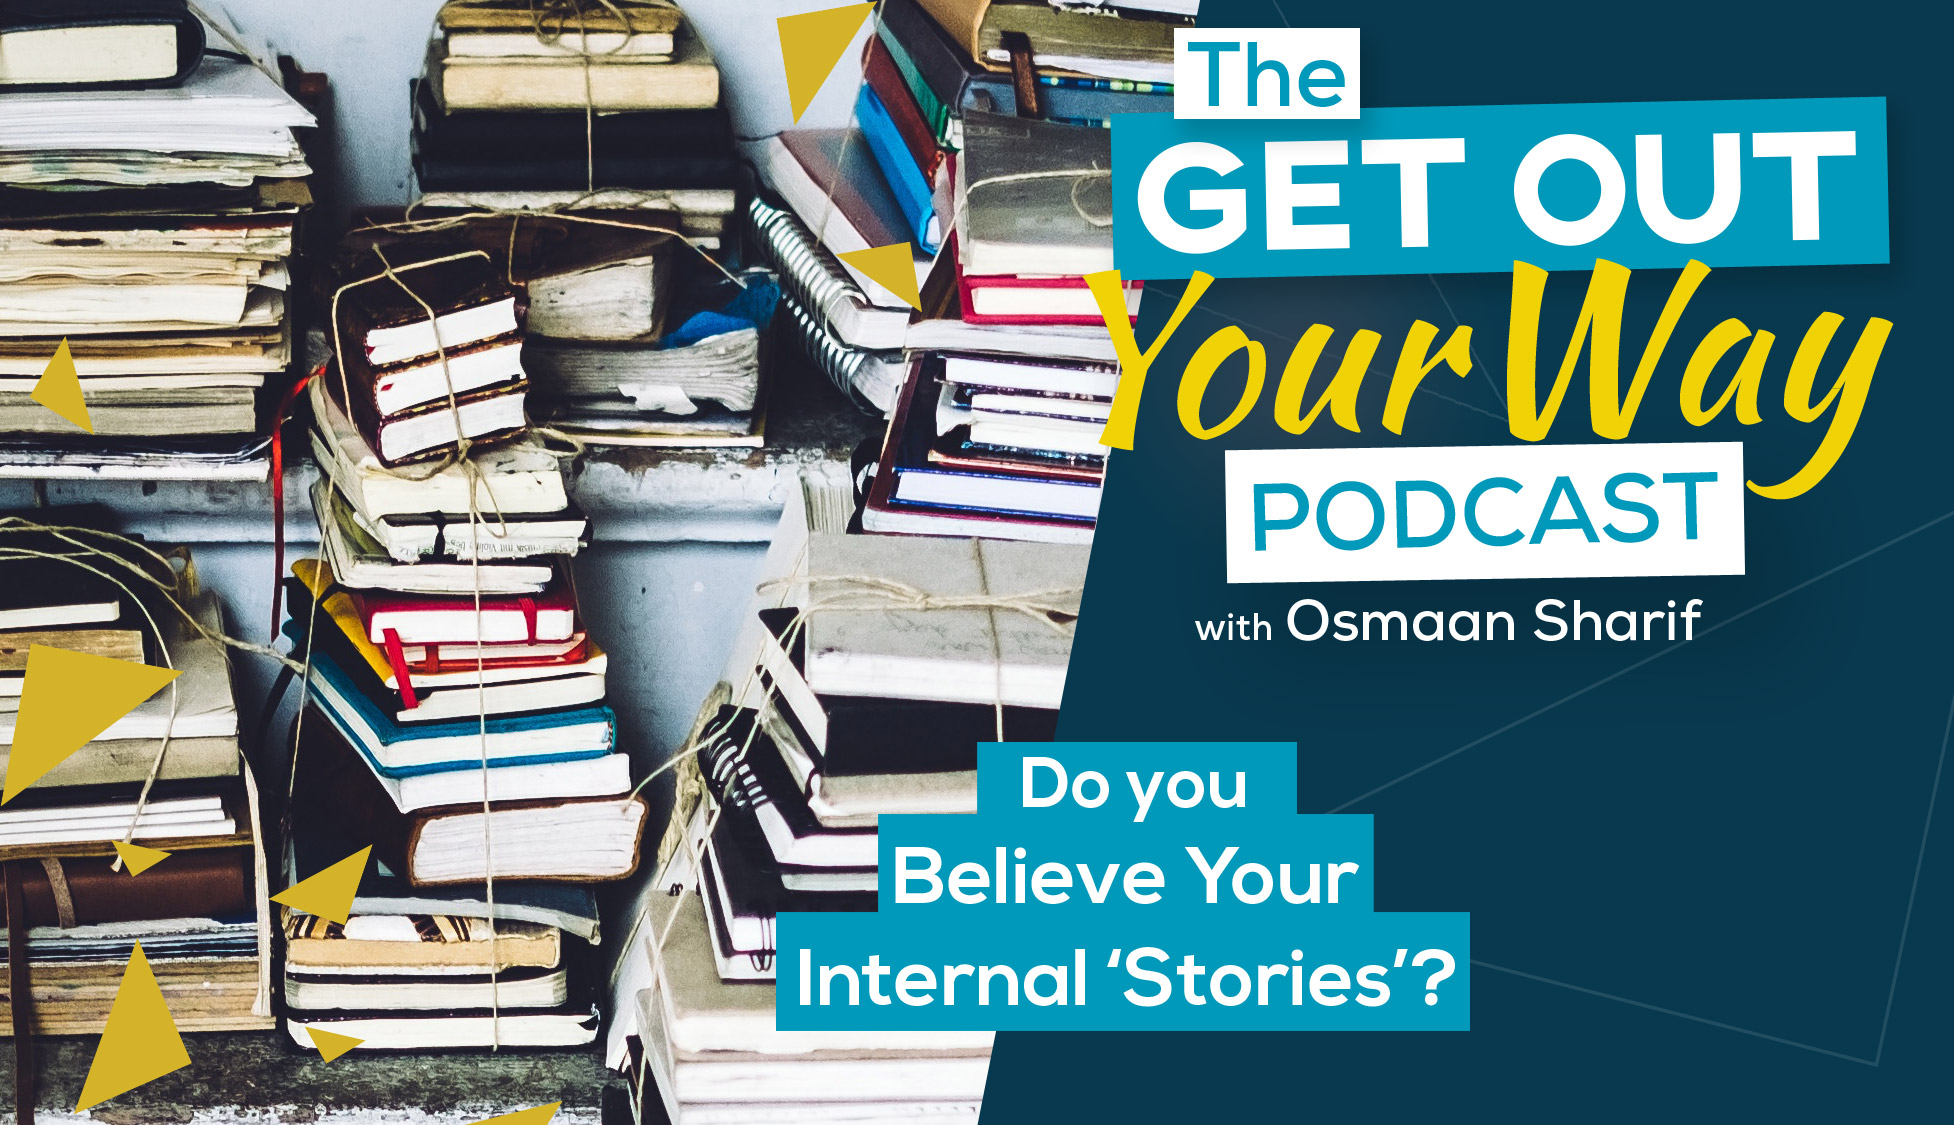 Do you believe your internal stories?